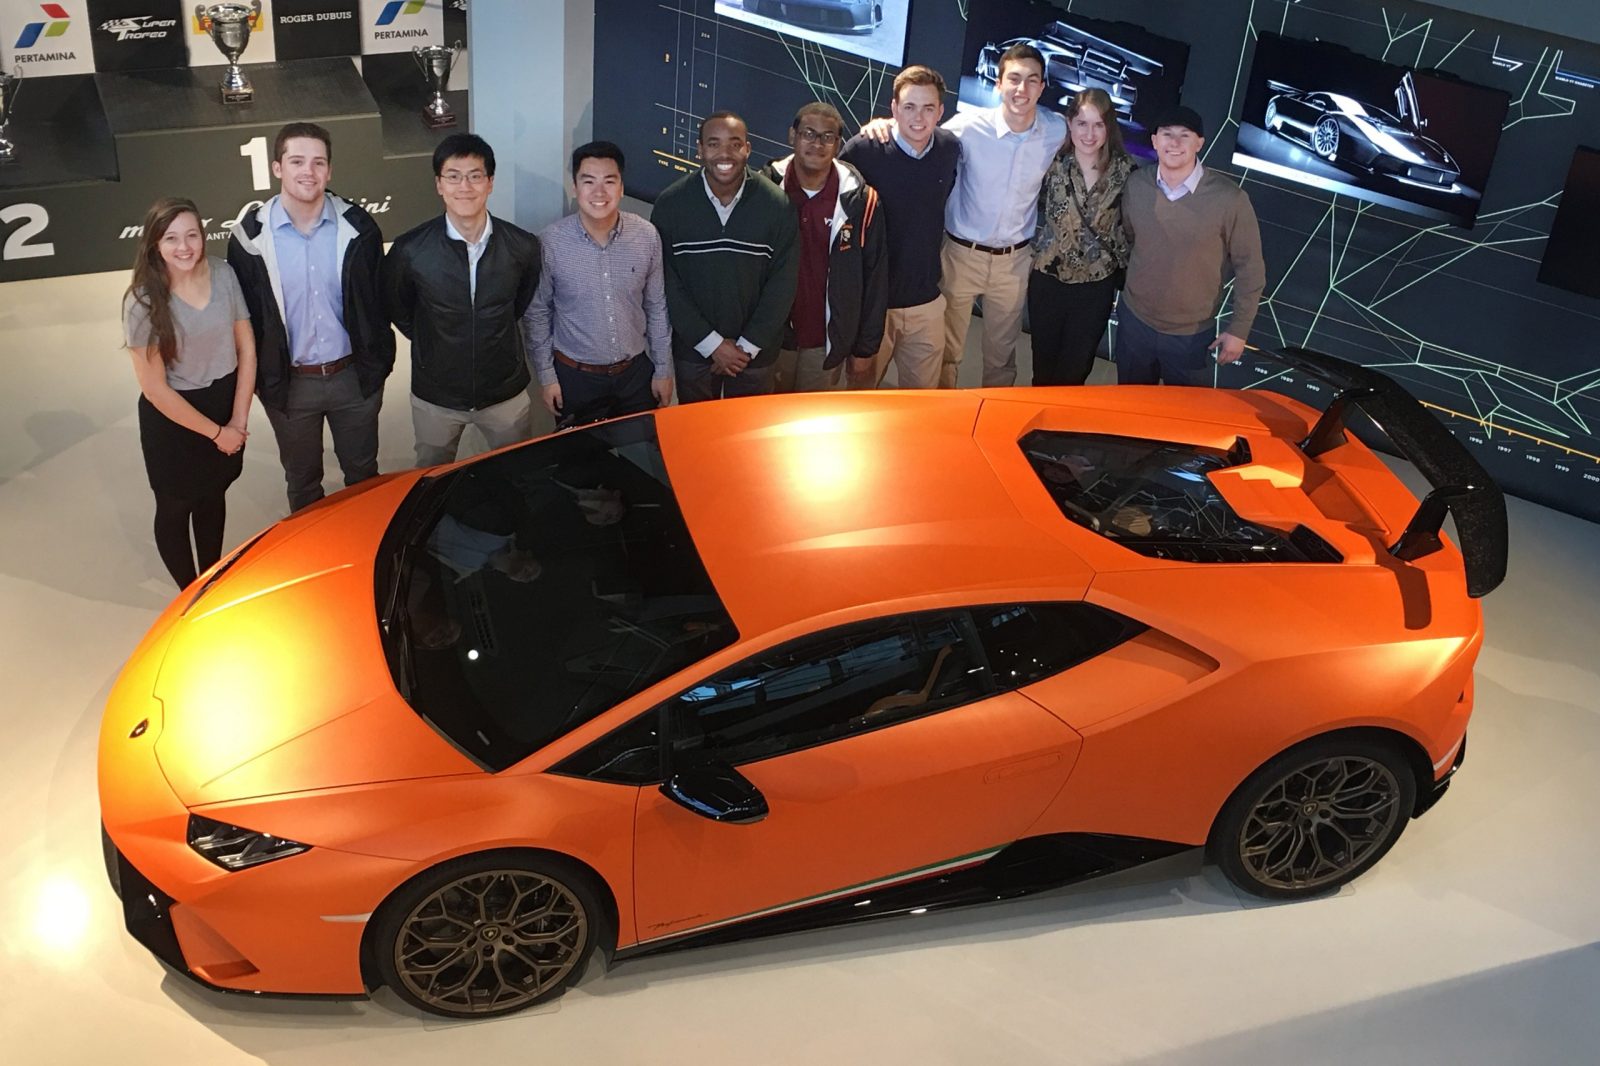 At Museo Lamborghini in Sant'Agata Bolognese, the group toured the factory to learn more about the assembly of the sports cars. From left: Kaitlyn Murphy, Shane Curtis, Spencer Pao, Phil Tsoi, Darius Boles, Casey Polk, Jack Lerch, Tim Burnette, Kat Friberg, Connor Davis. Photo by Jennifer Clevenger